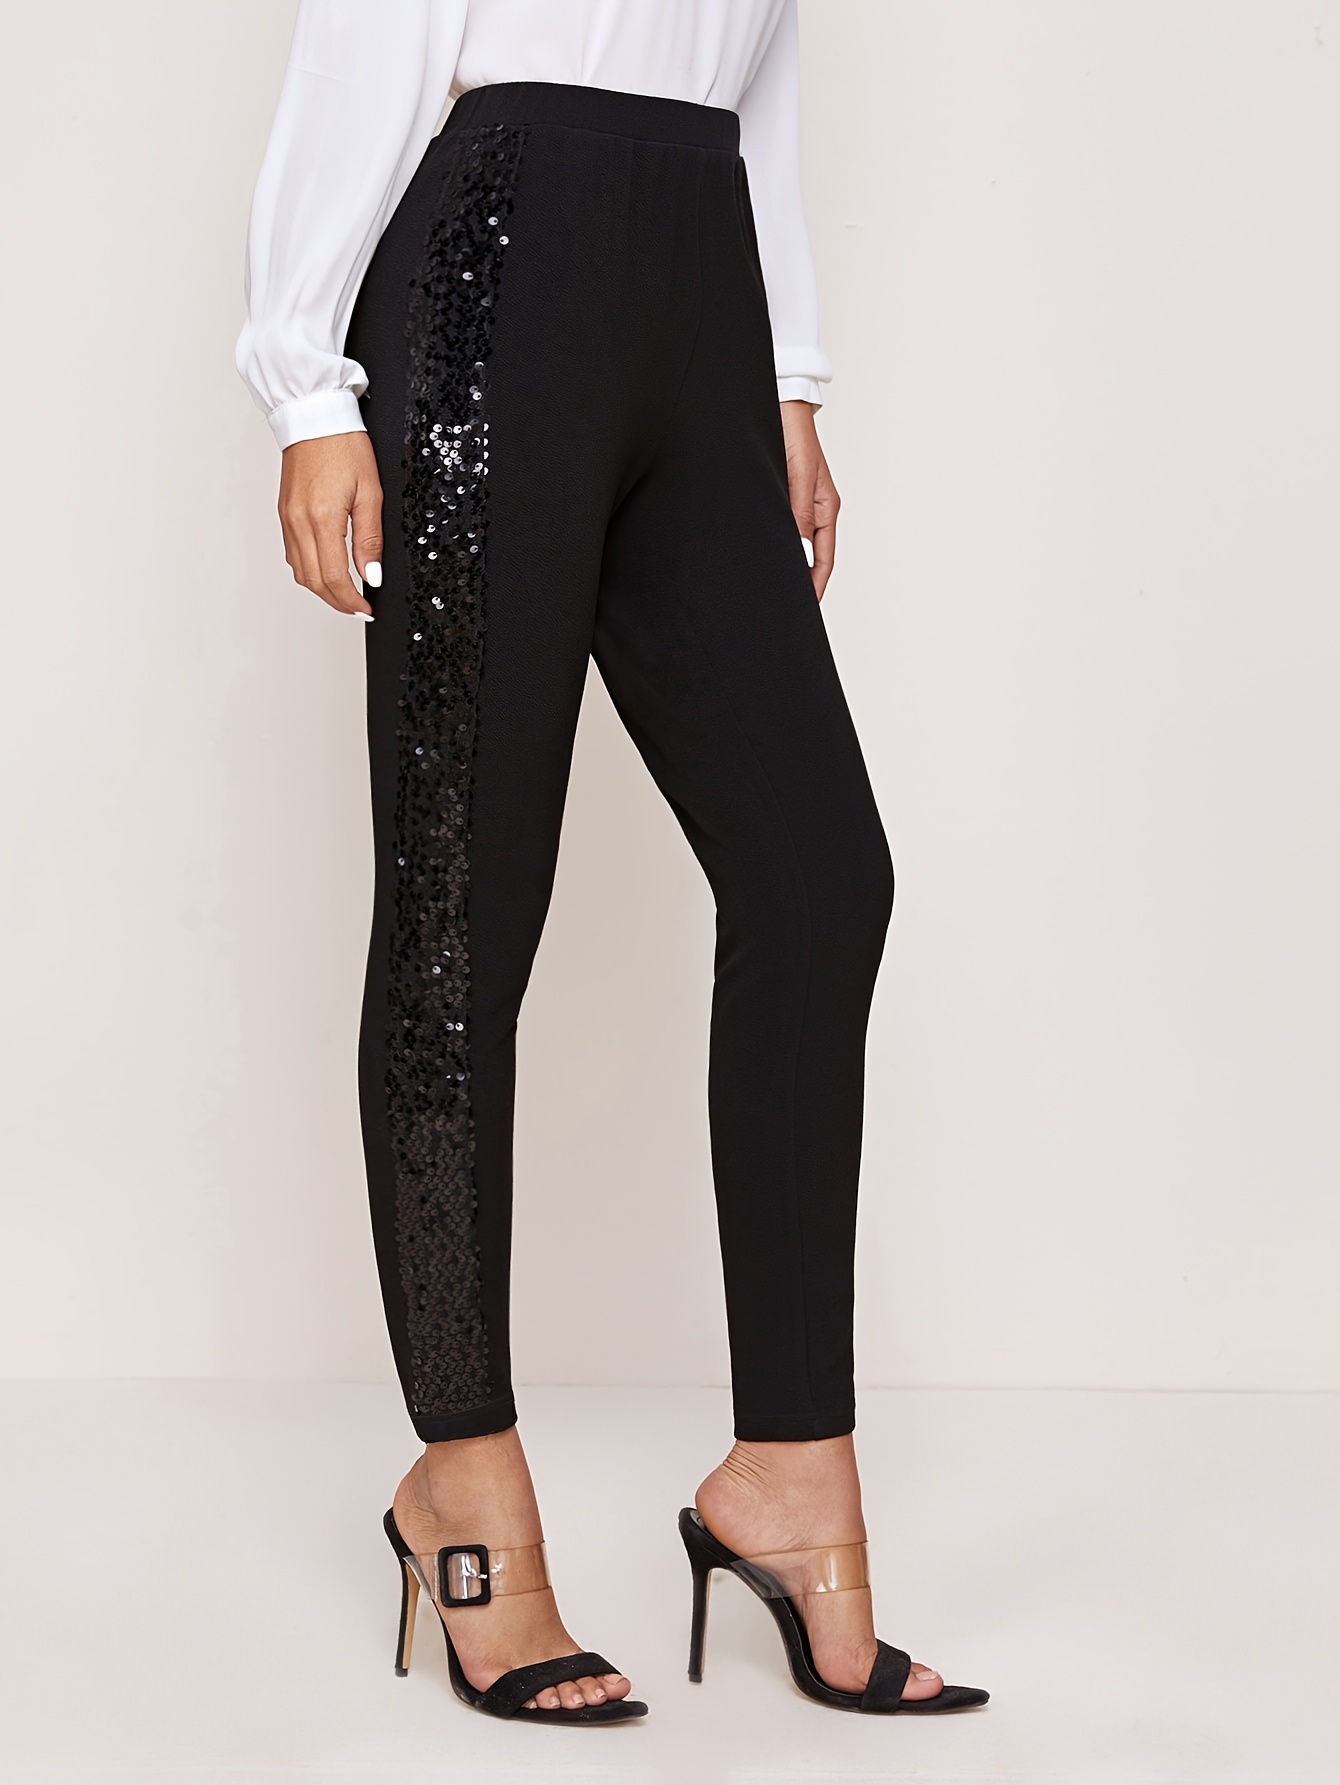 Valentine's Day Women's Casual Solid Sequined Pants Stretchy